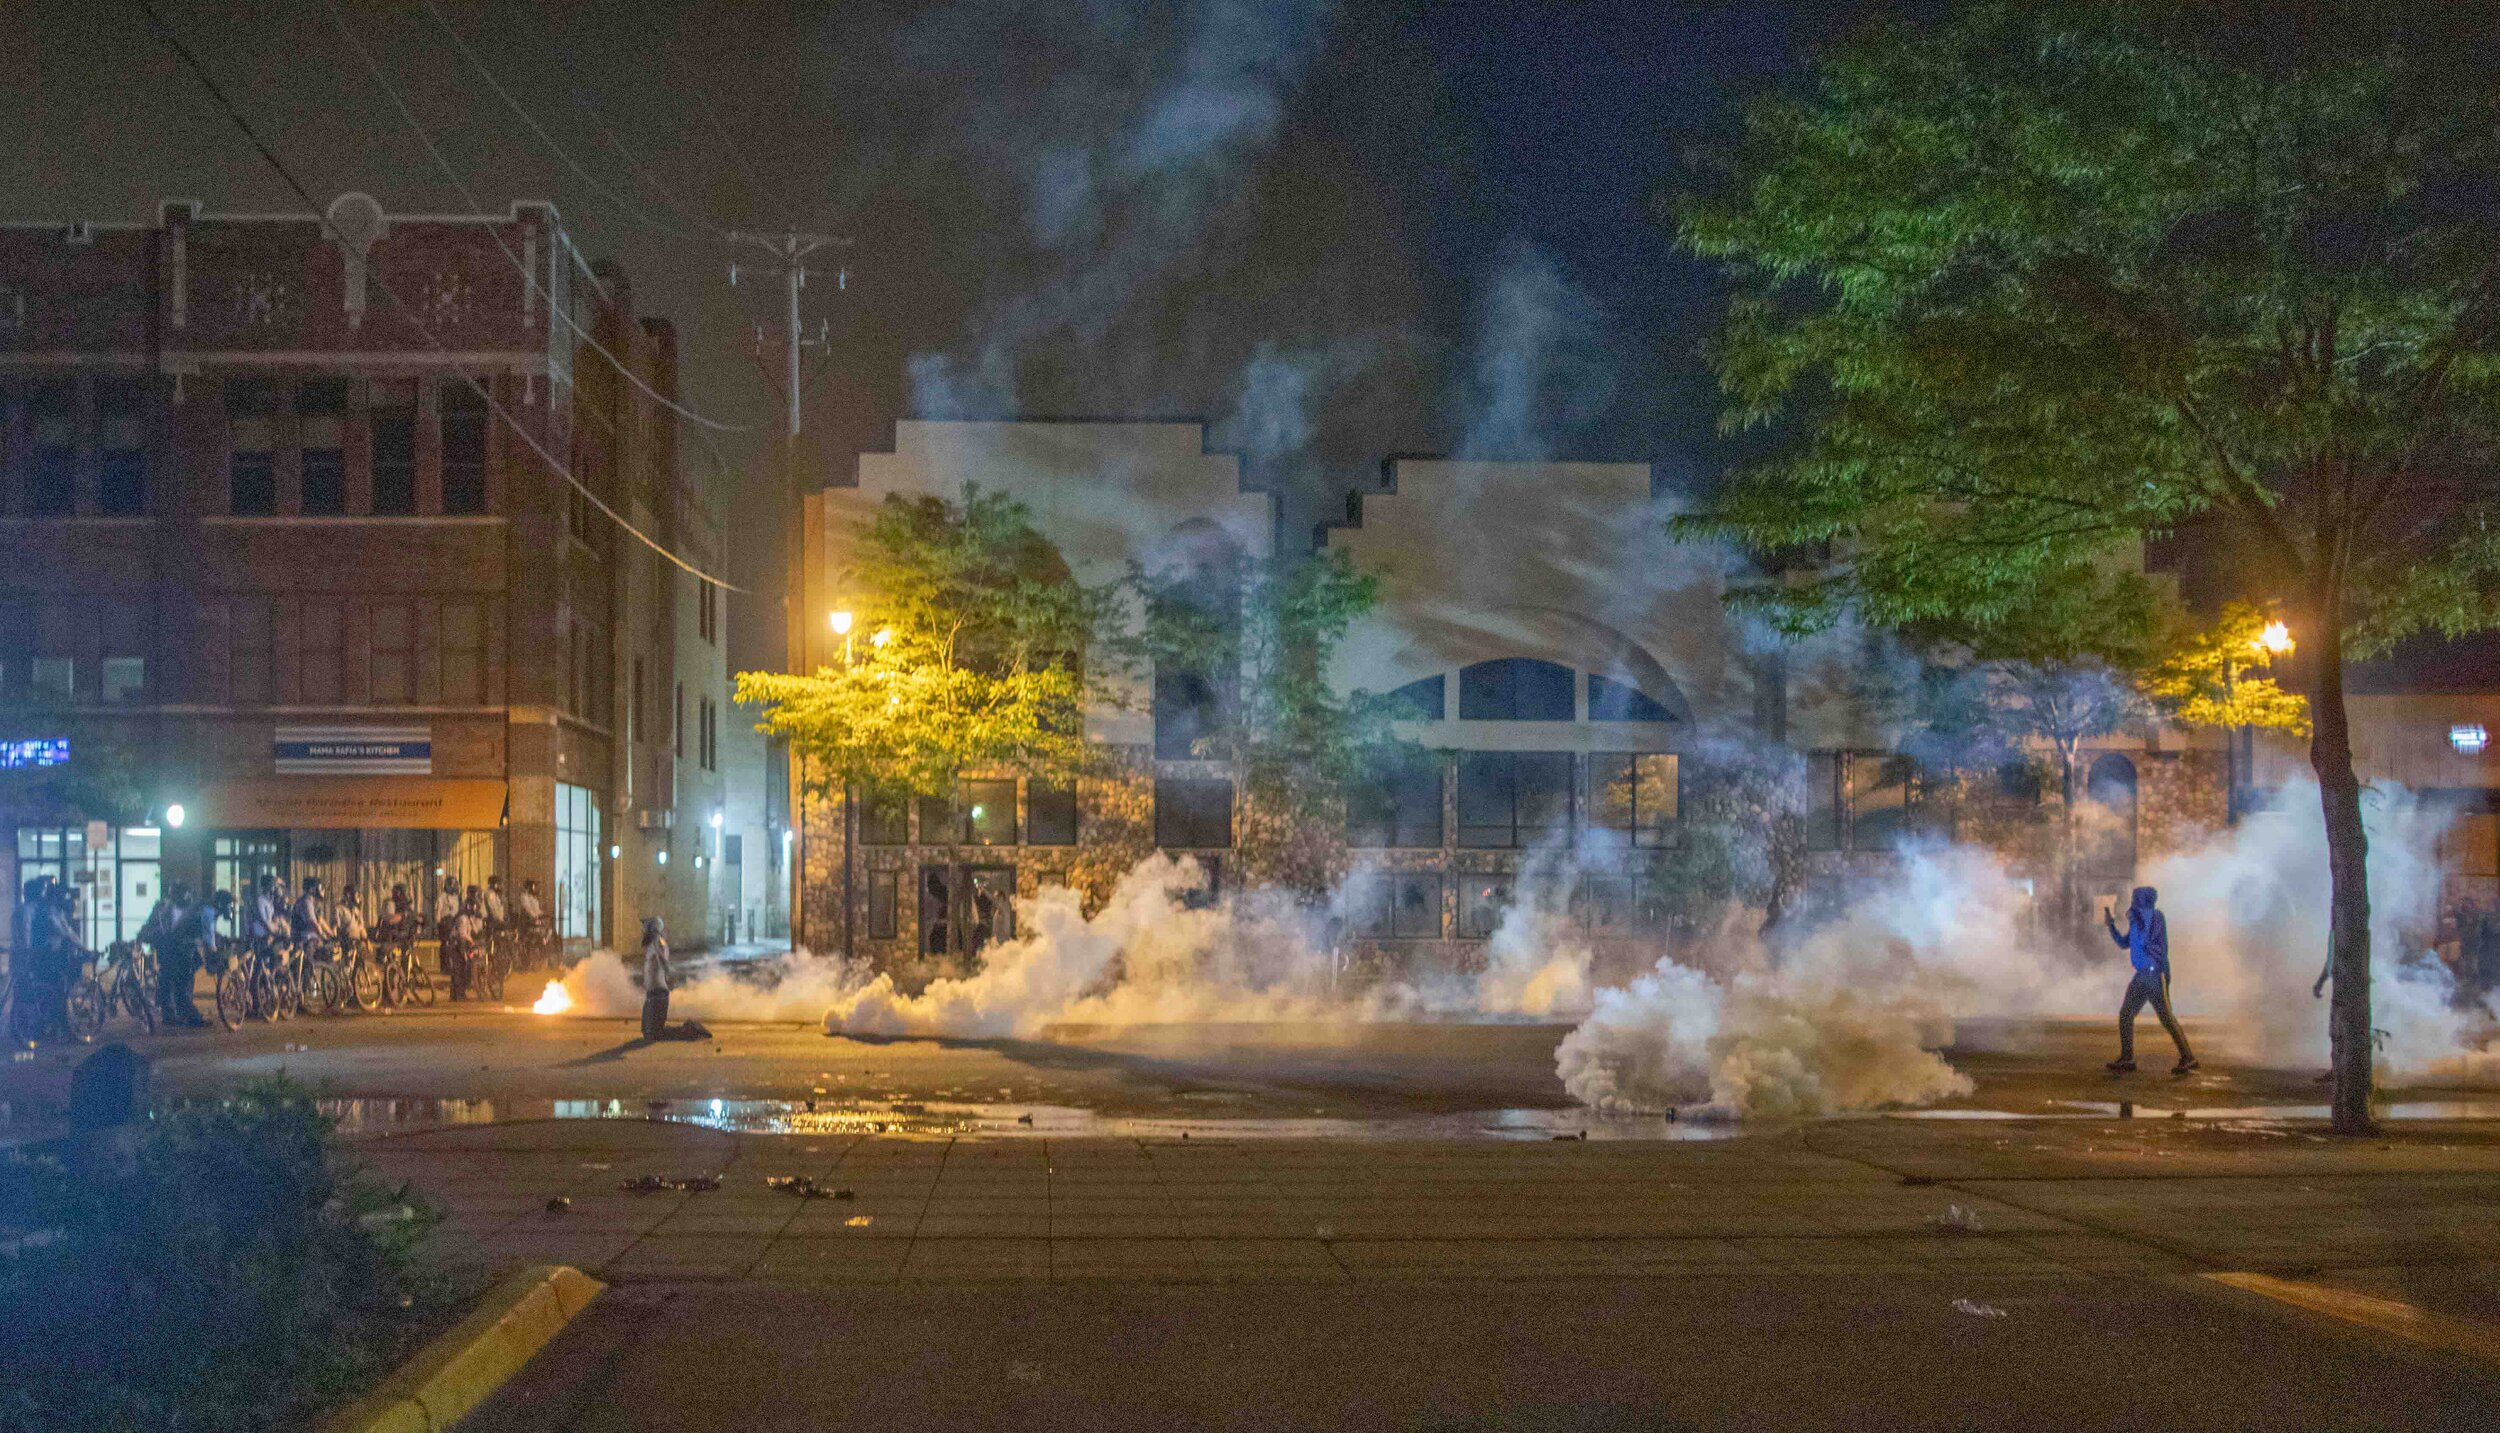  On his knees, a protester holds his arms out as a tear gas canister blows up near him in Minneapolis, Minnesota on May 27. 